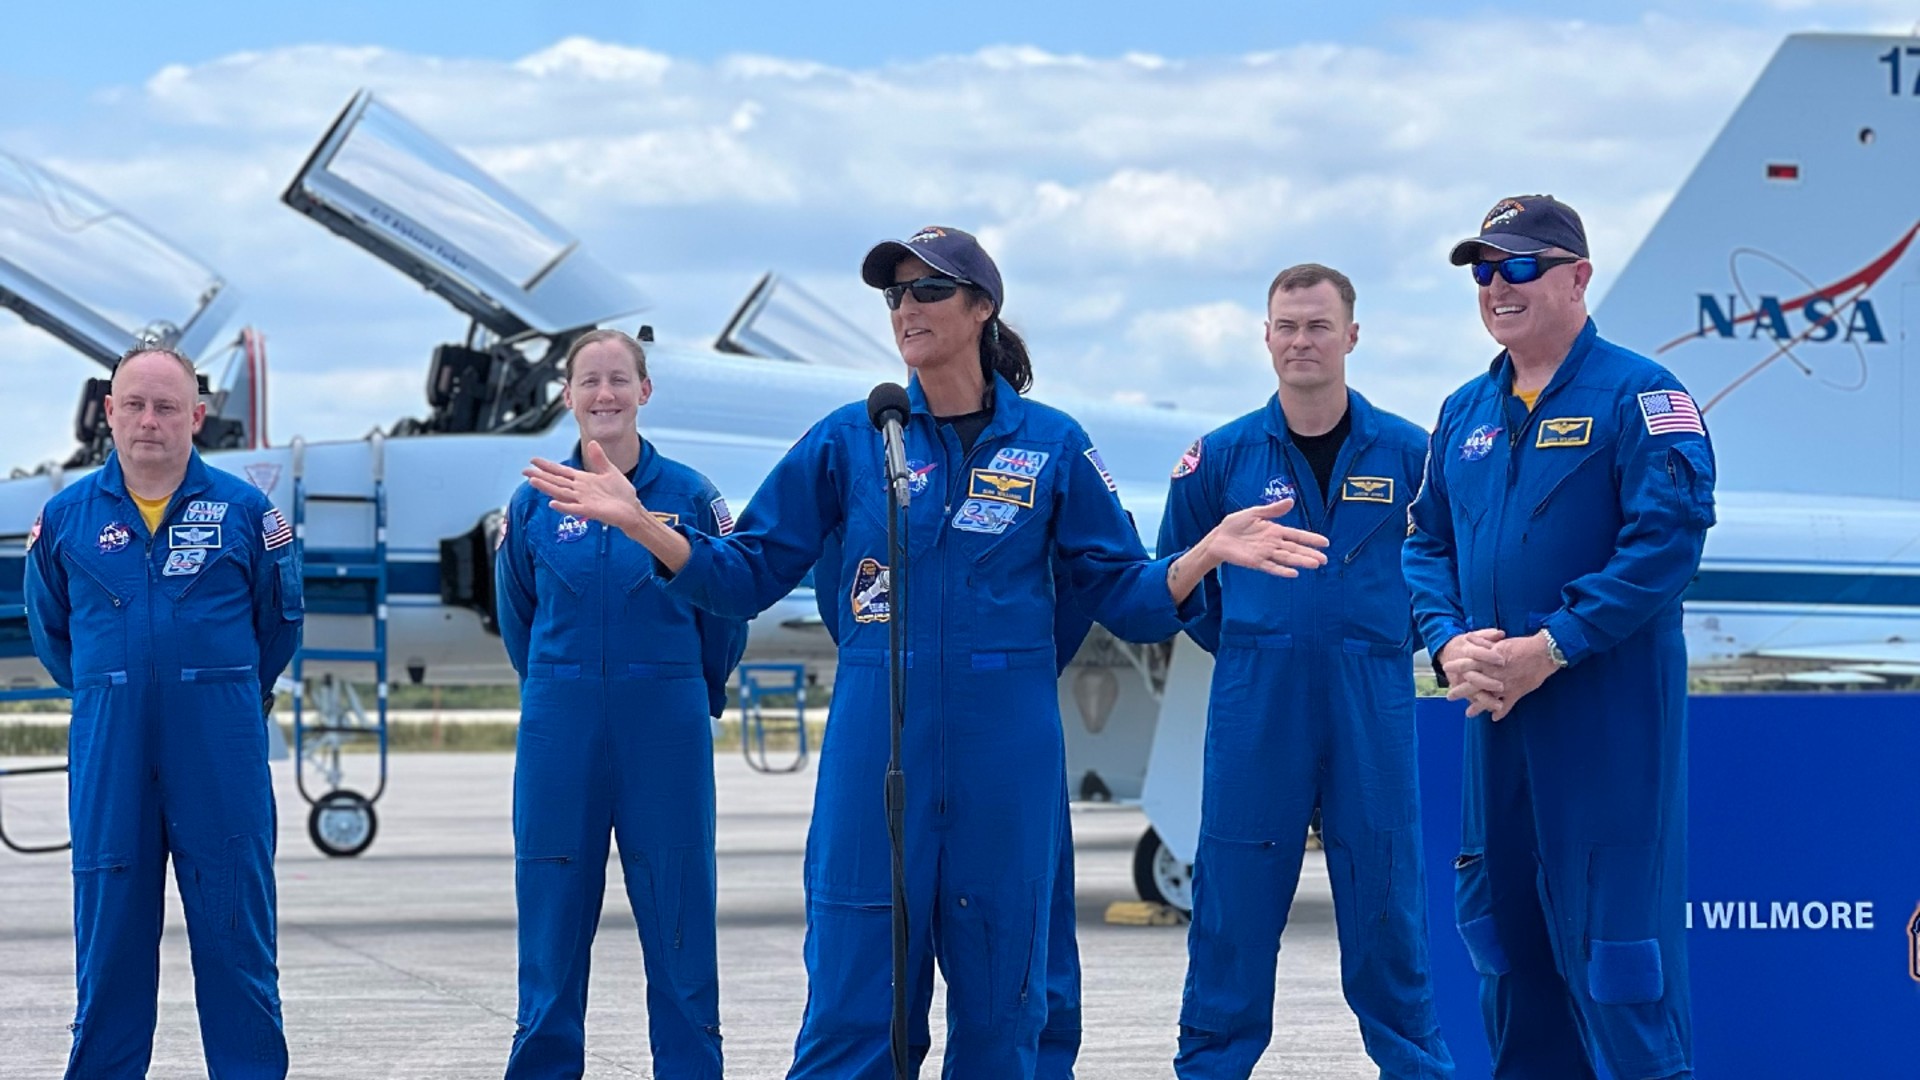 NASA Space Technology four astronauts in blue flight suits stand on the encourage of microphones on an airplane runway. two white and blue jets are on the encourage of them